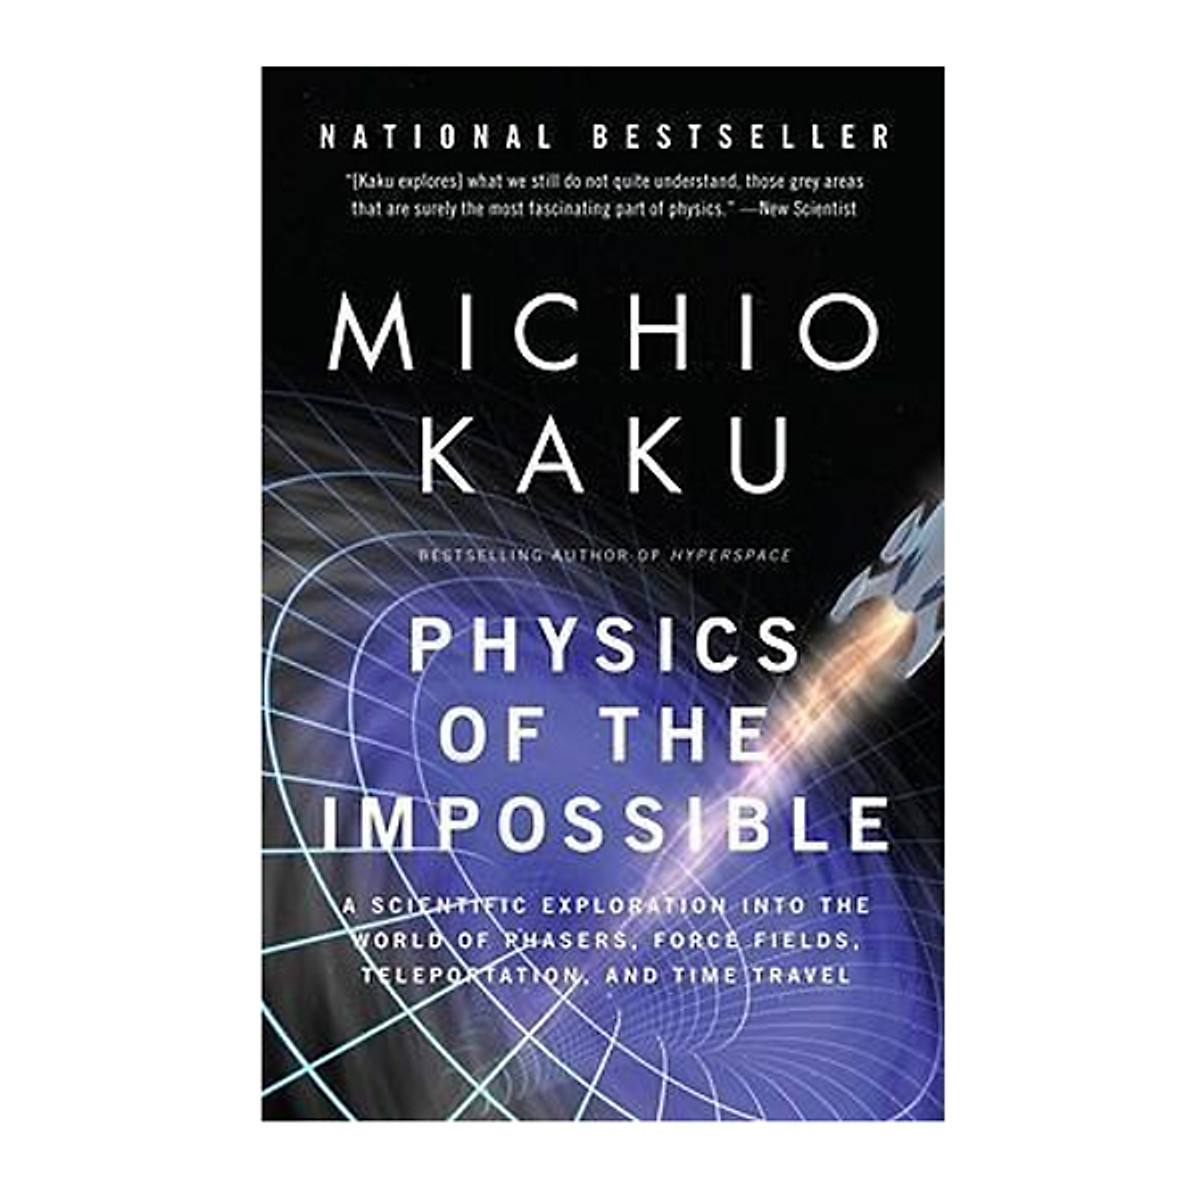 Physics Of The Impossible (Backlist)